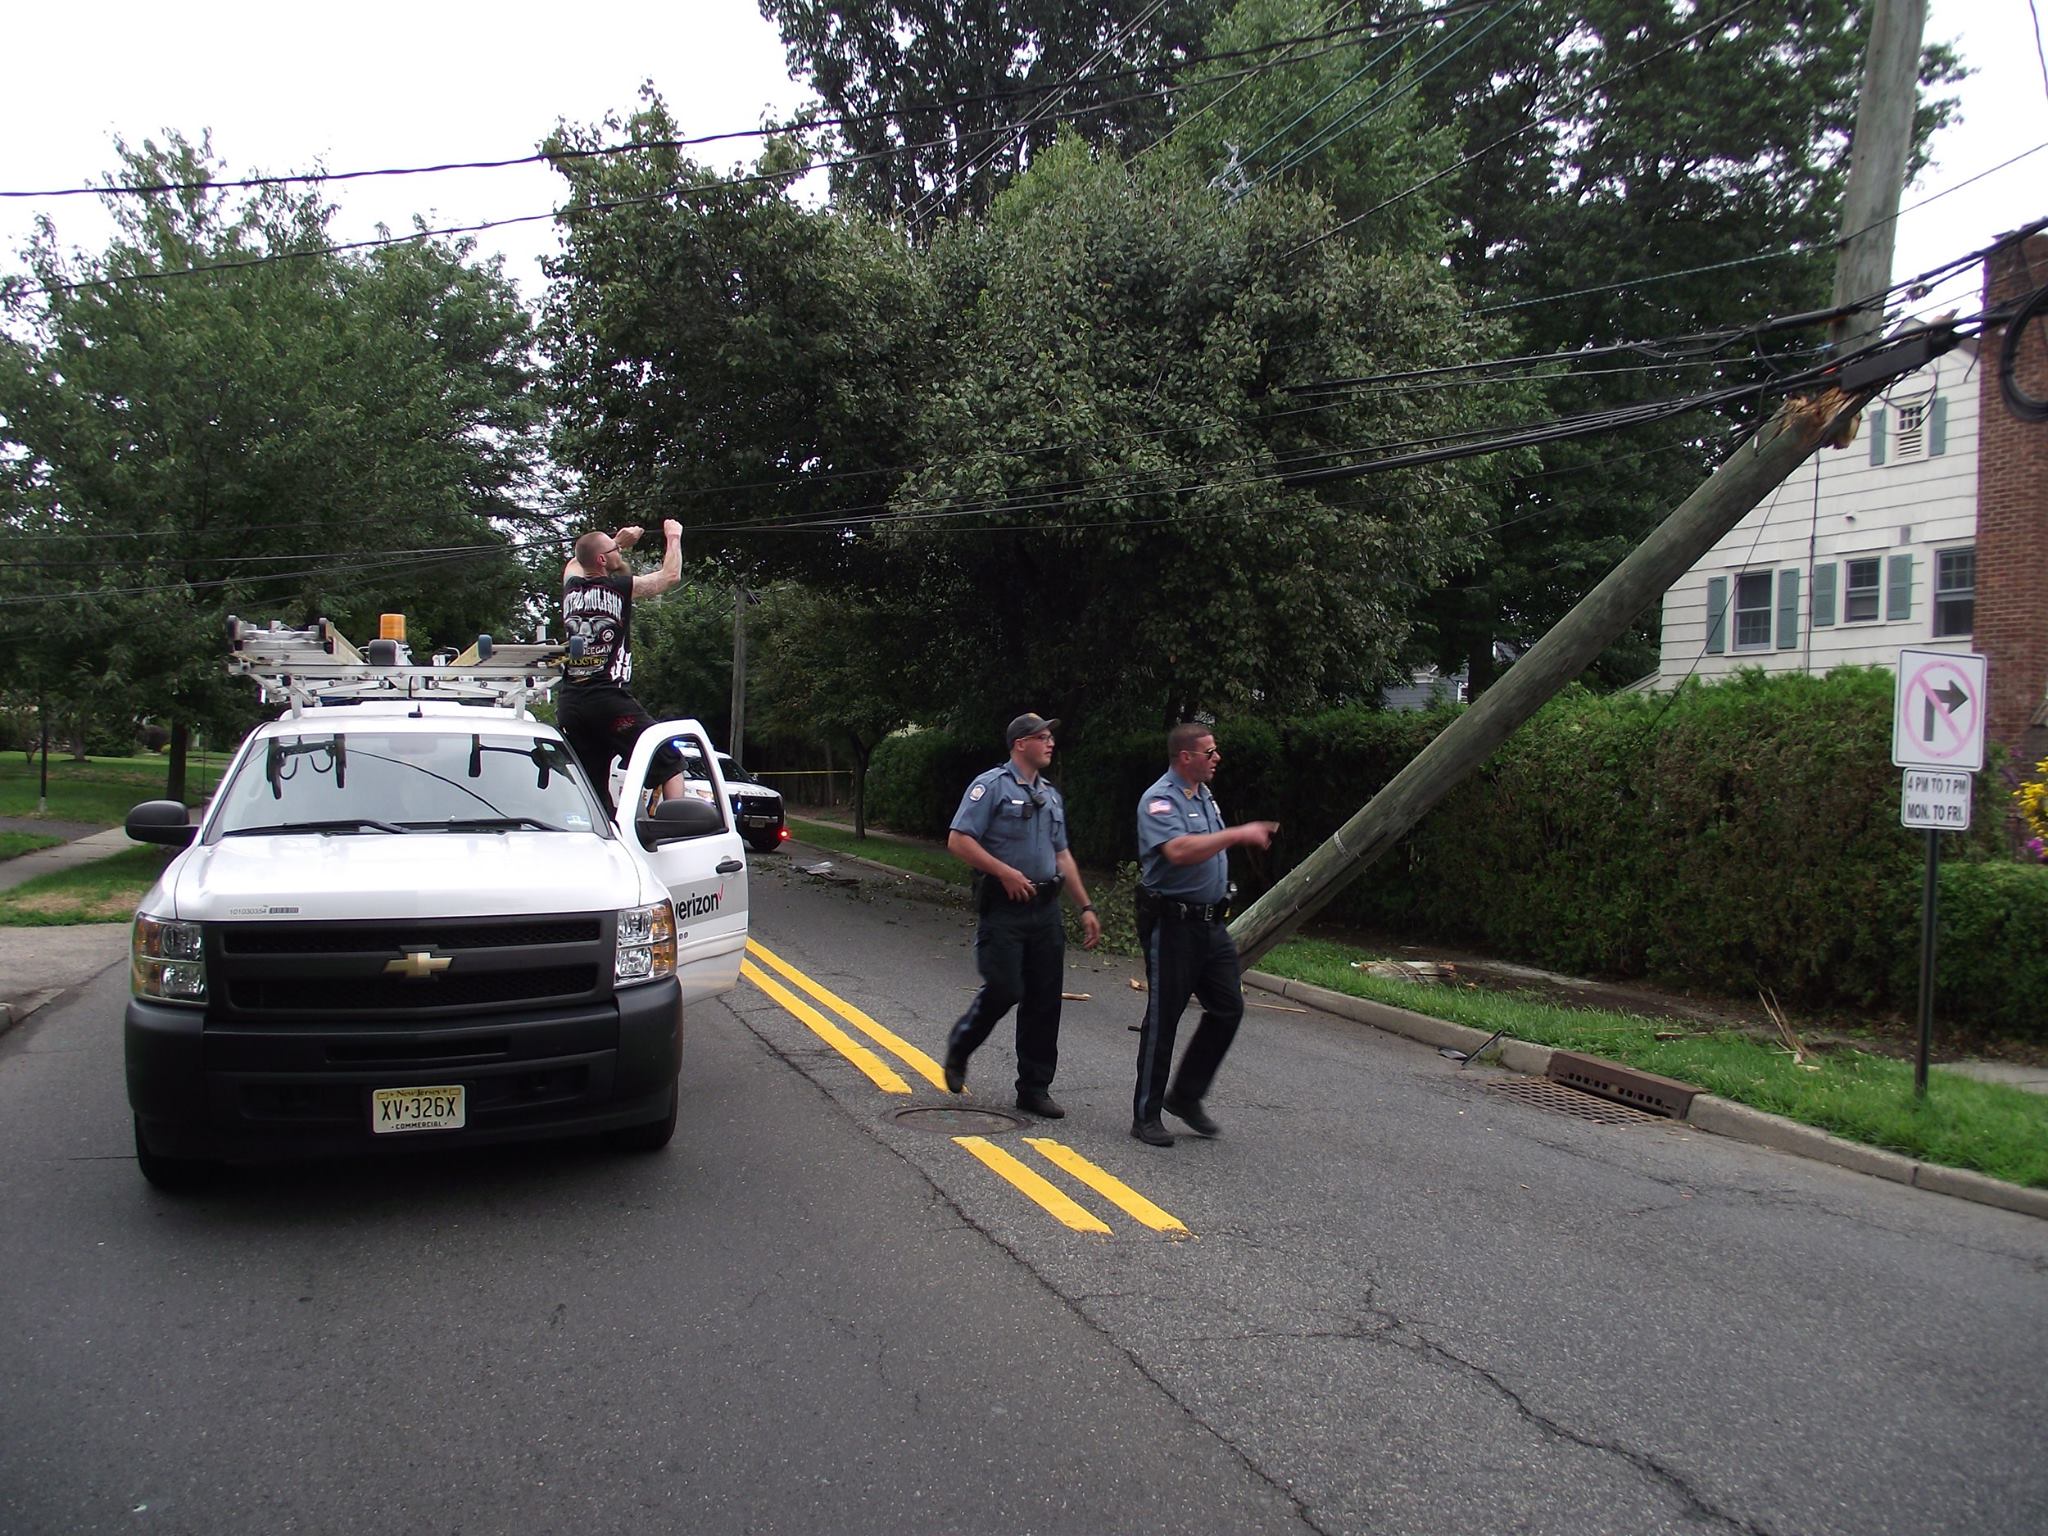 Diver Takes Out Utility Pole at the intersection of Linwood and Walthery Avenues in Ridgewood